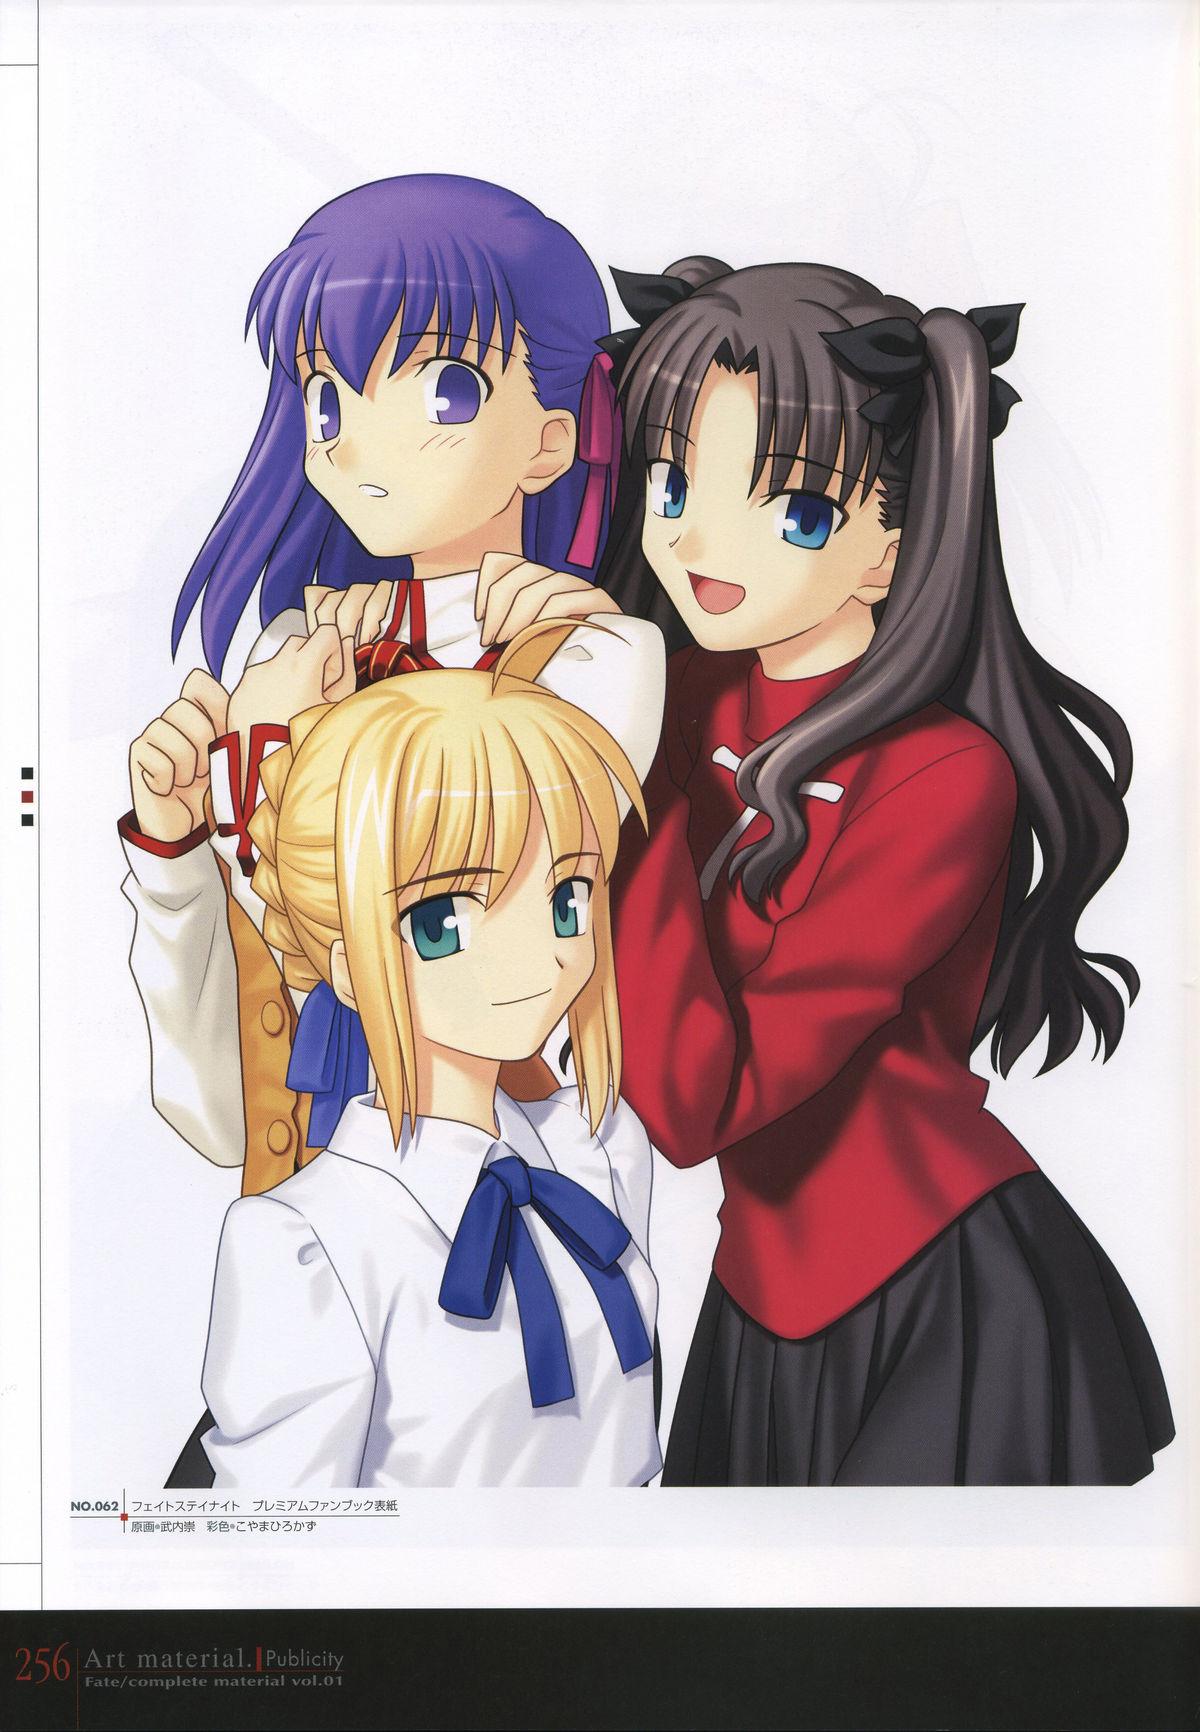 Fate/complete material I - Art material. 260